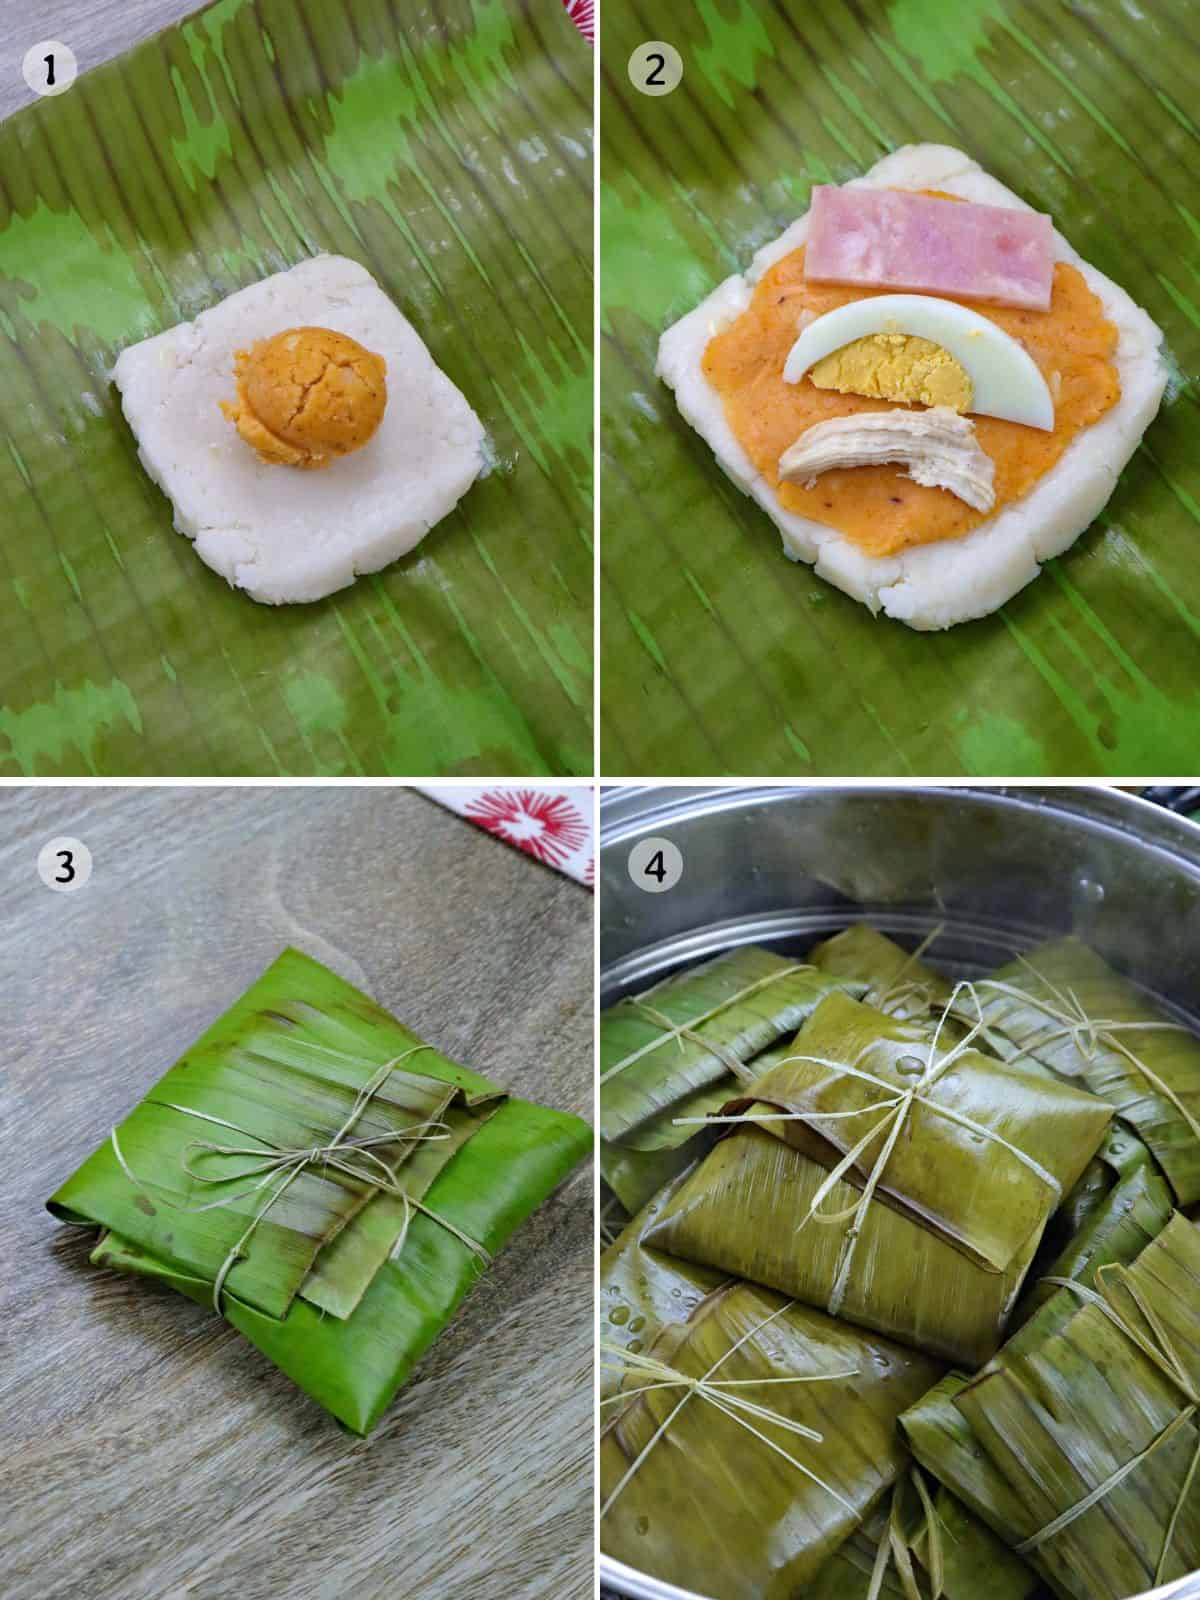 wrapping tamales in banana leaves and steaming.